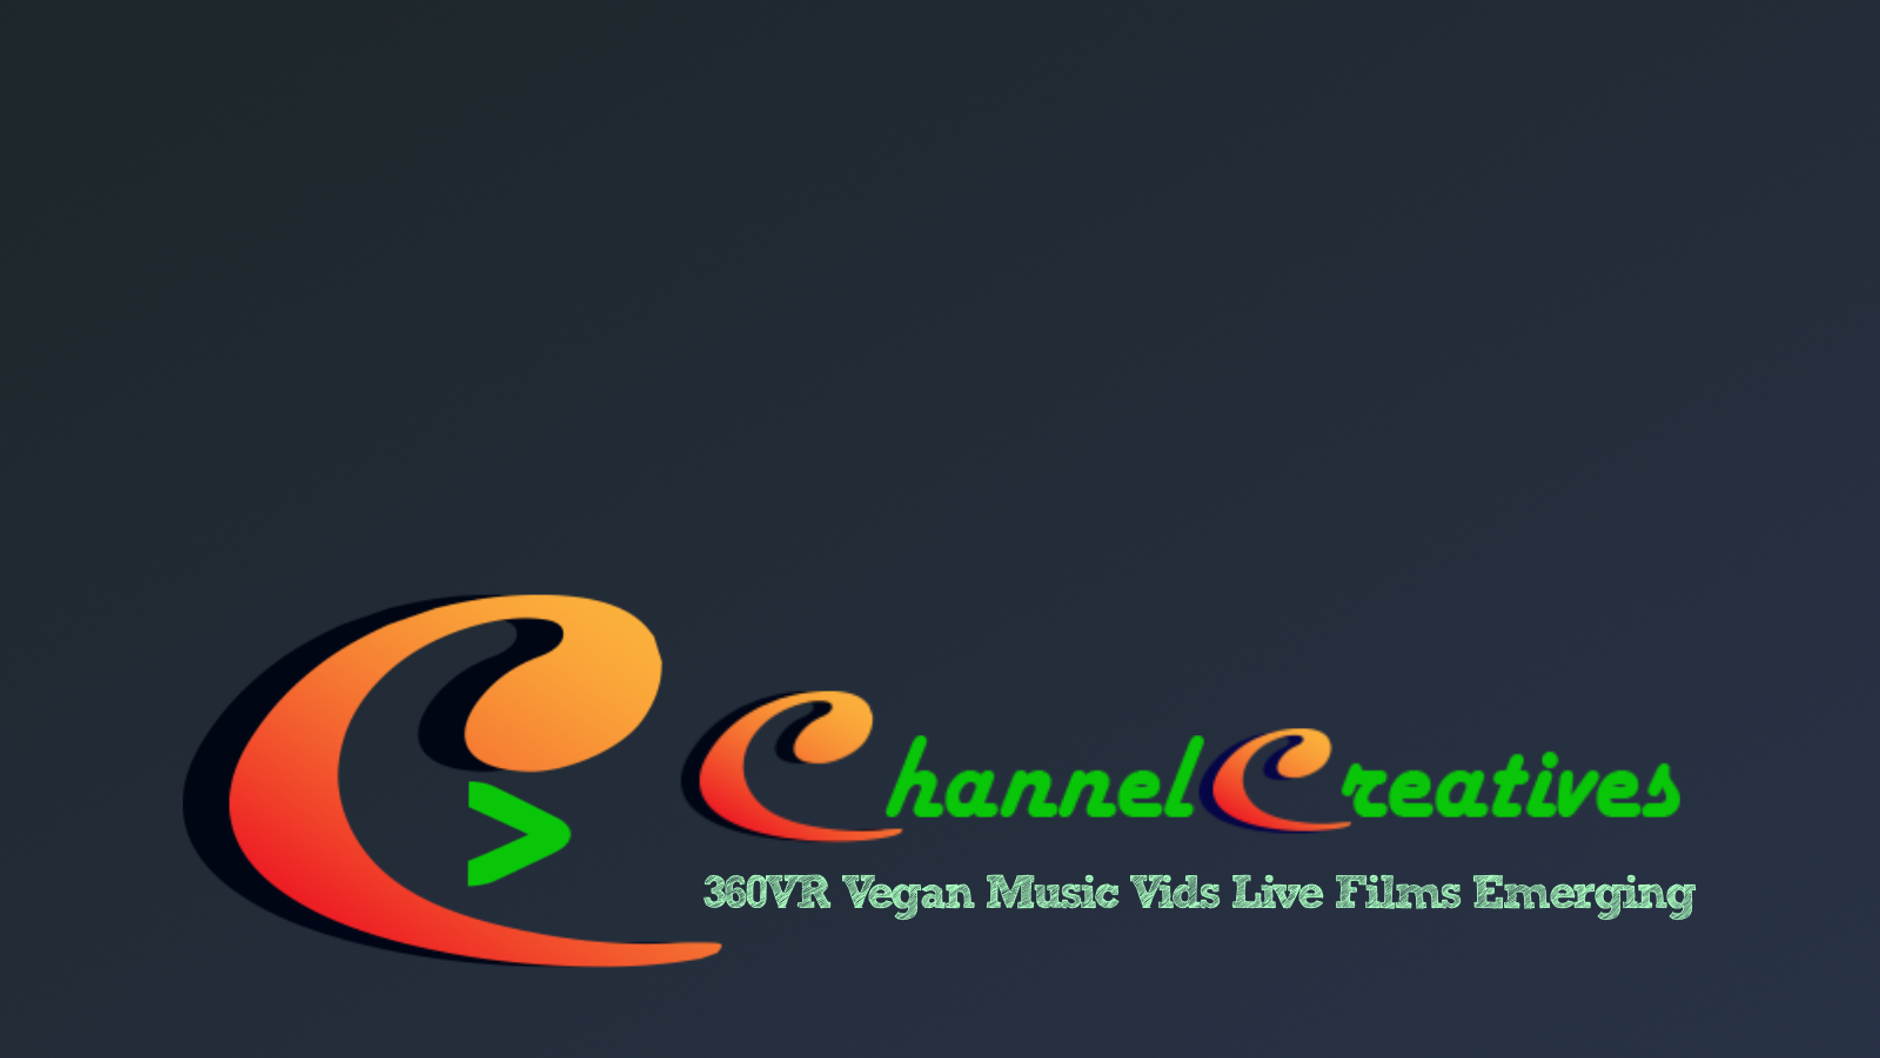 ChannelCreatives